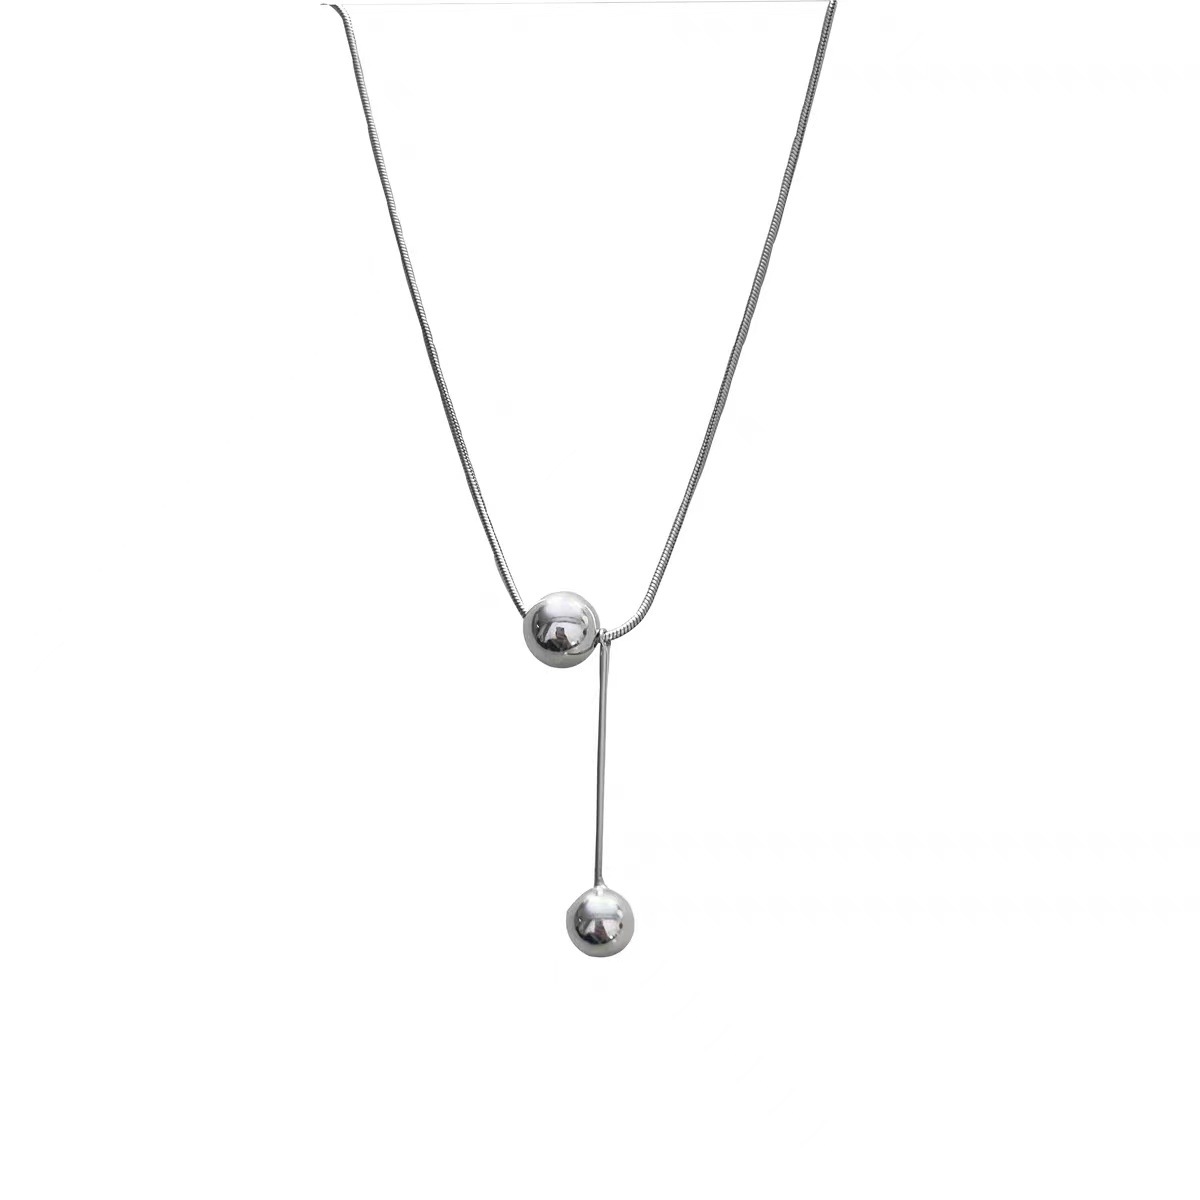 Titanium Steel Ball Necklace Niche Ins Lucky Necklace Clavicle Chain Design a Niche Double Ball Necklace